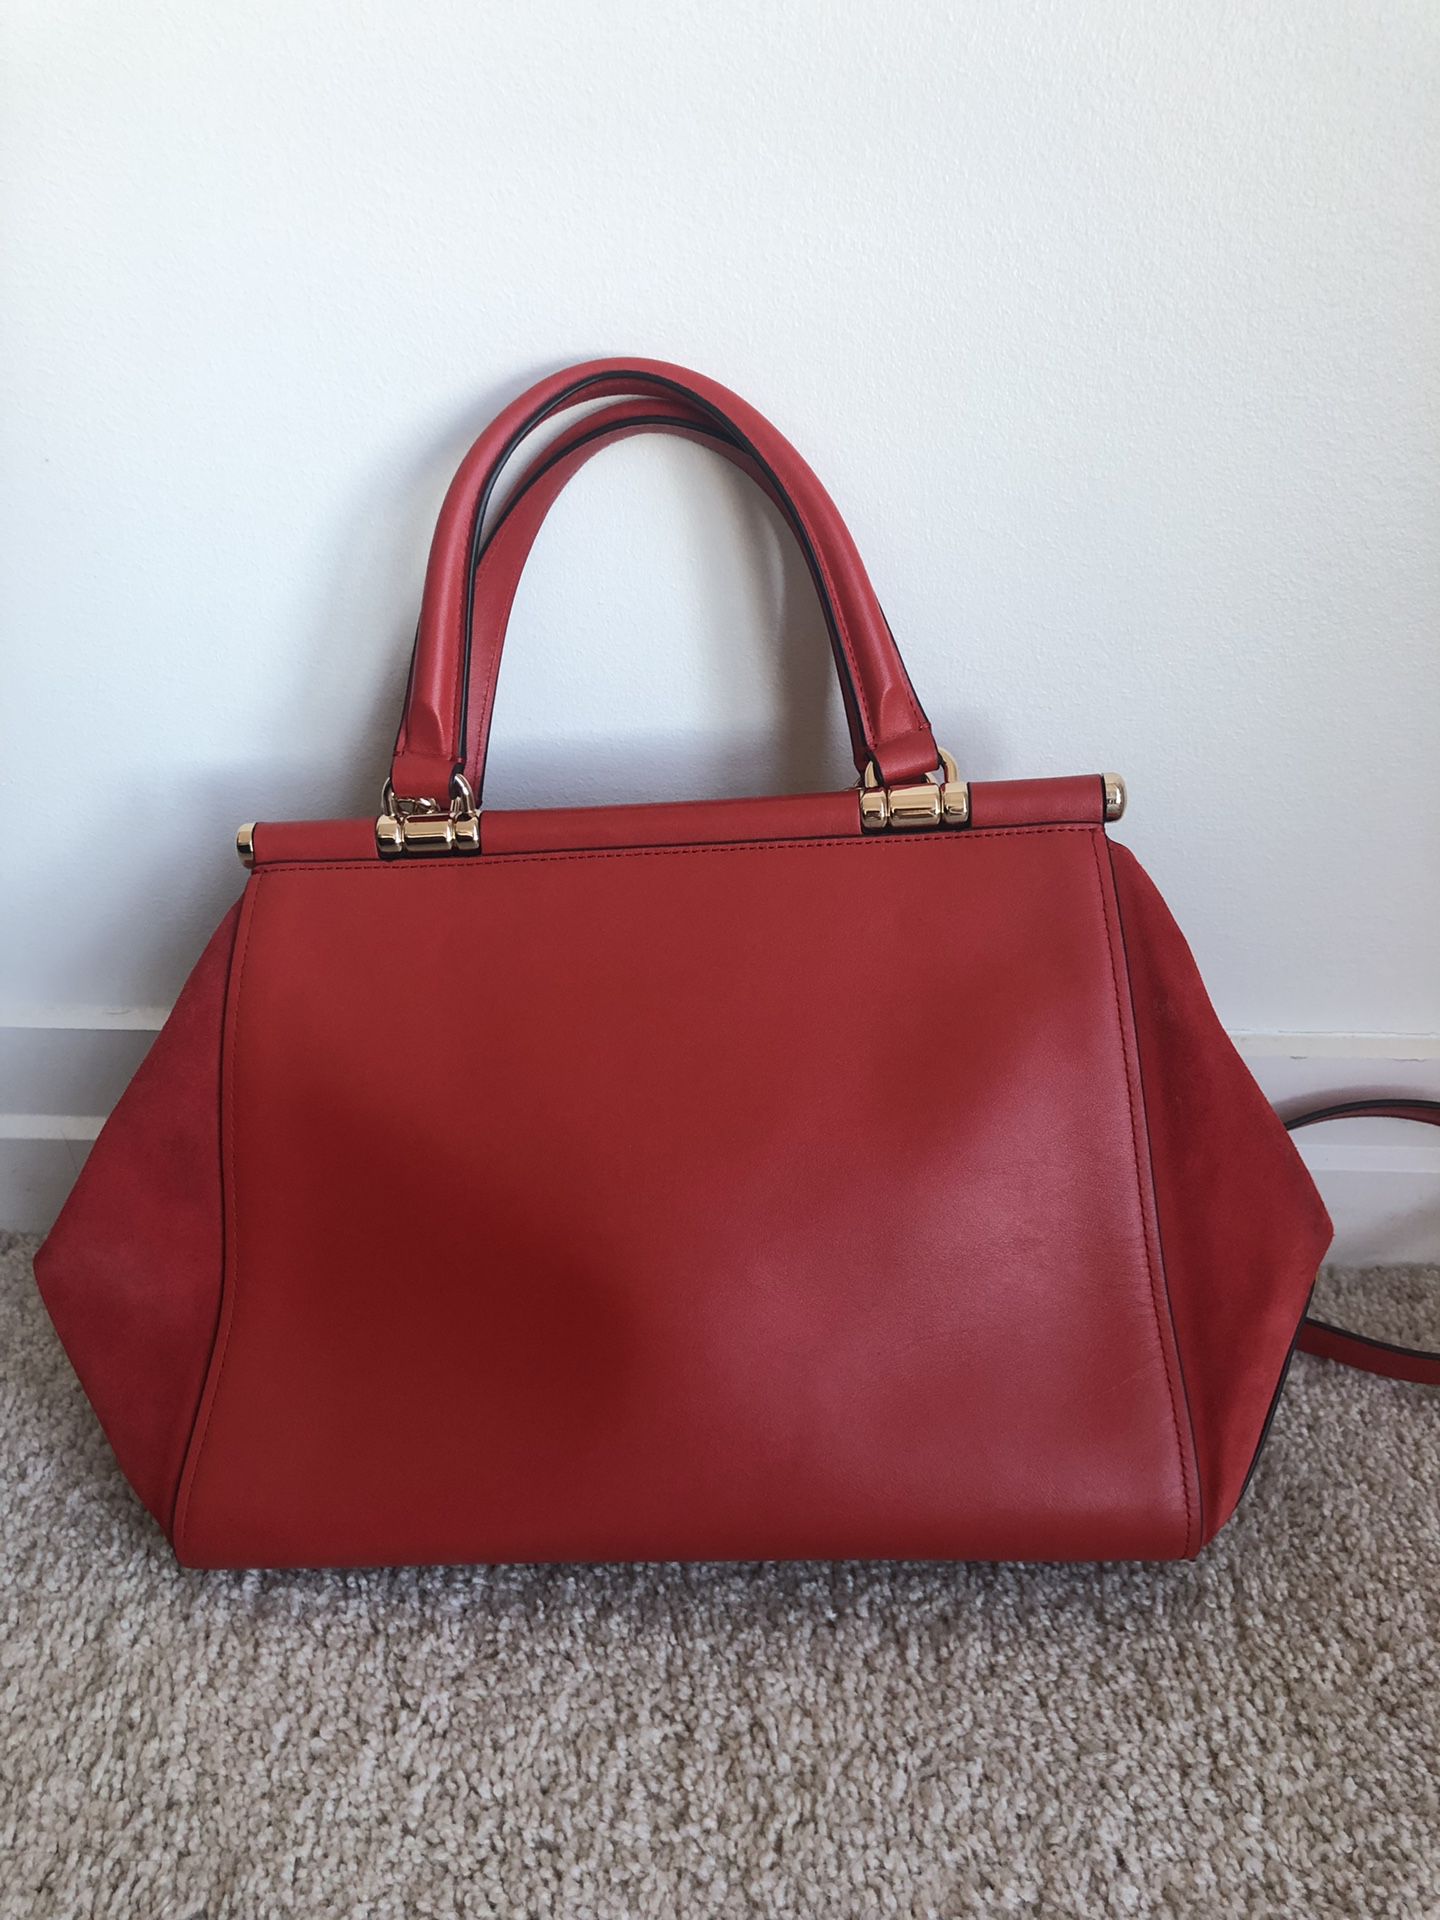 coach X Selena Gomez red shoulder bag for Sale in Boston, MA - OfferUp